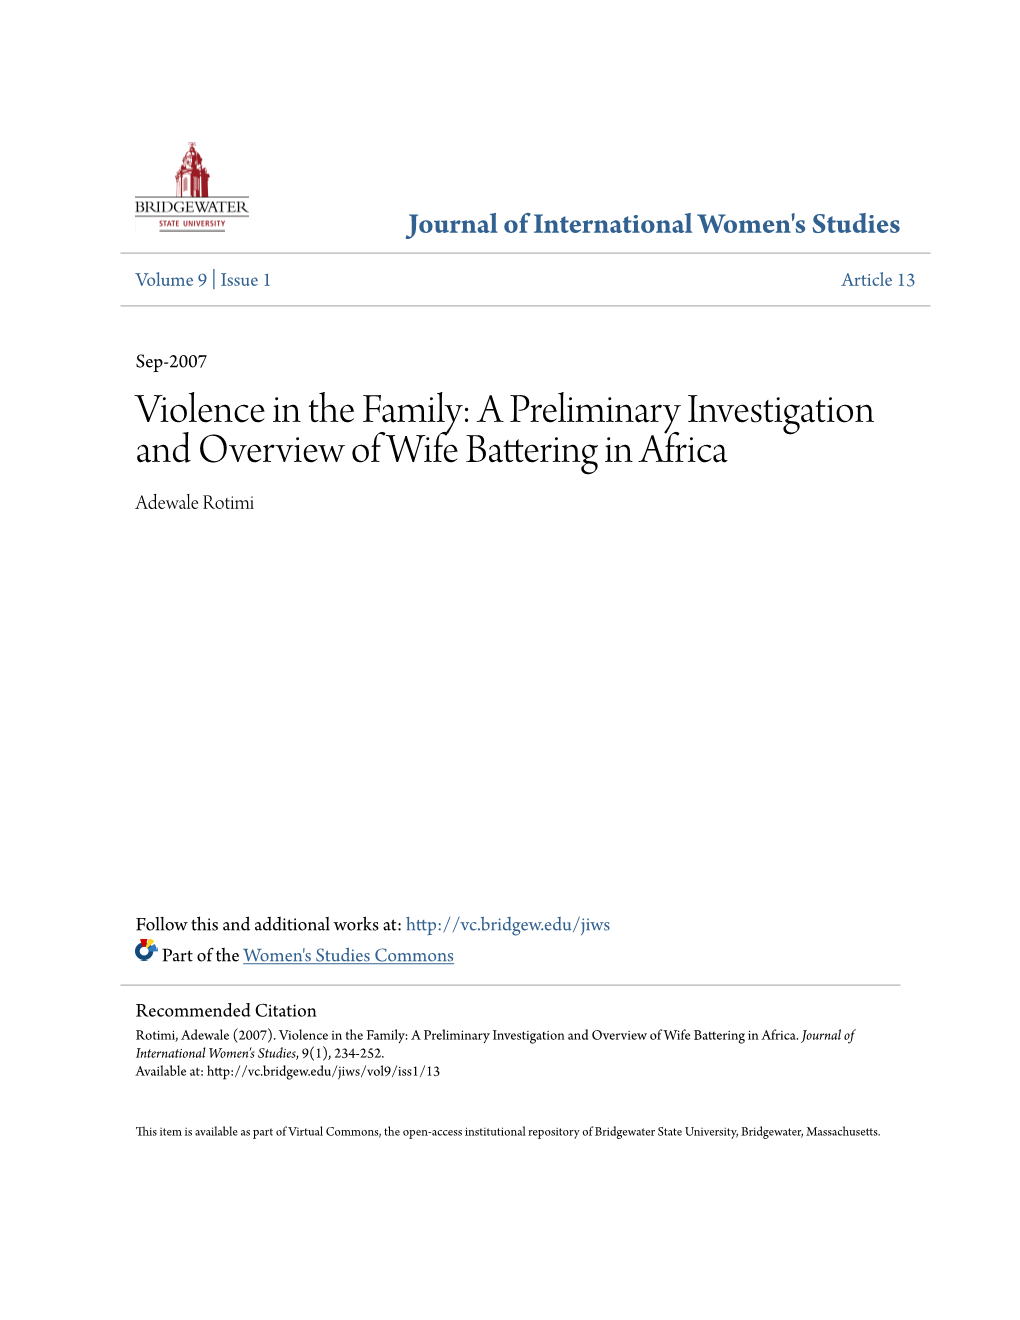 Violence in the Family: a Preliminary Investigation and Overview of Wife Battering in Africa Adewale Rotimi